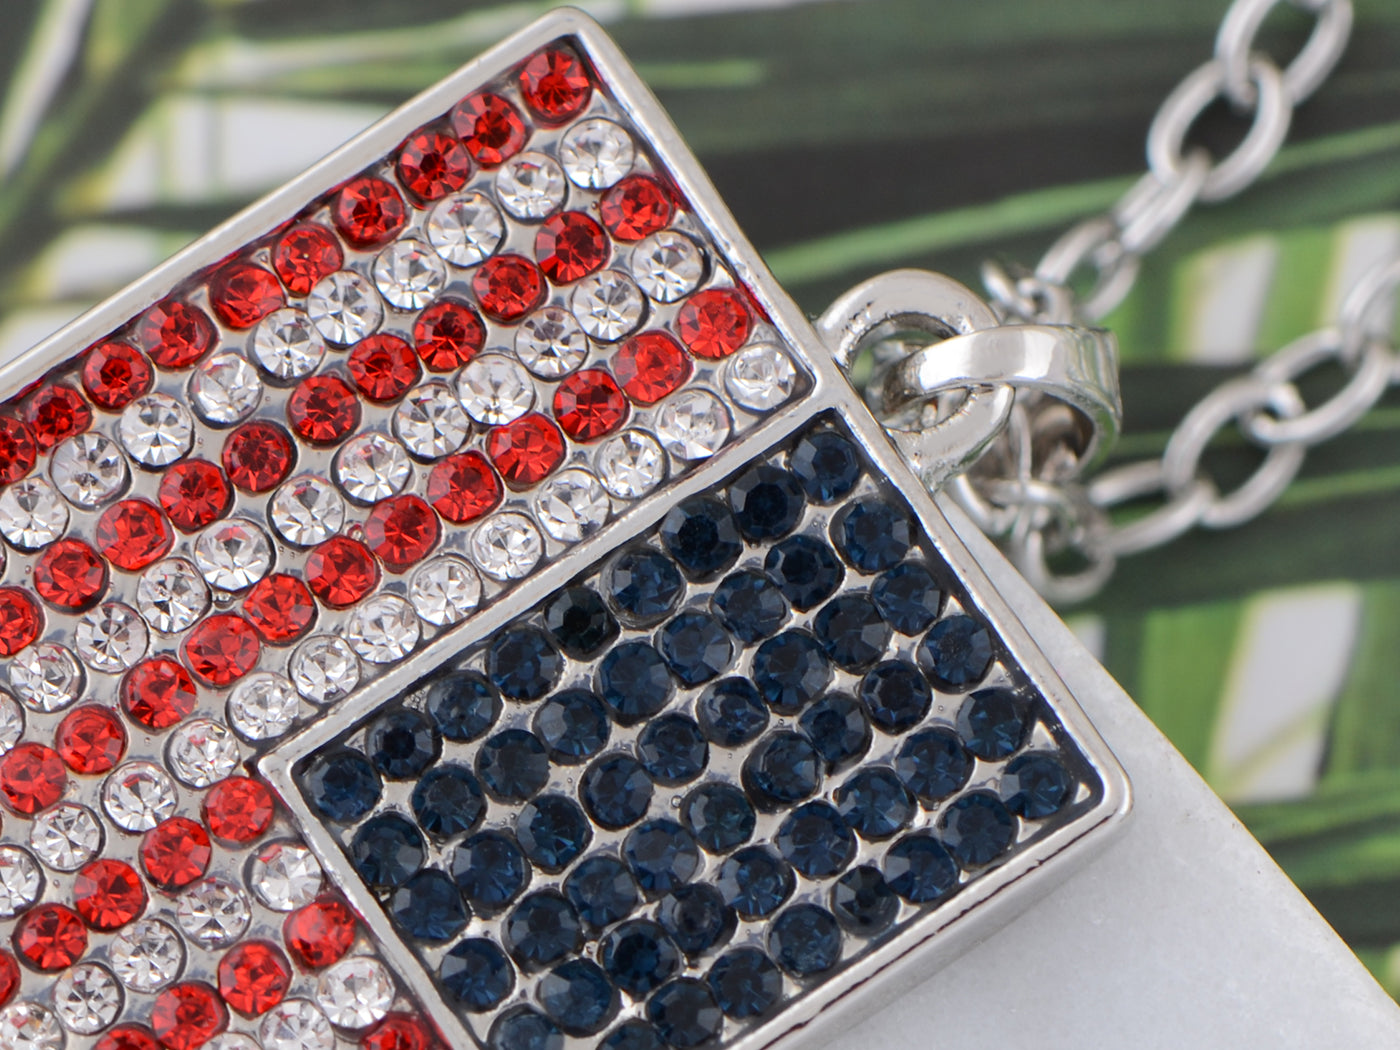 Alilang American Flag Jewelry Red Blue Crystal Rhinestones Necklace Pendant